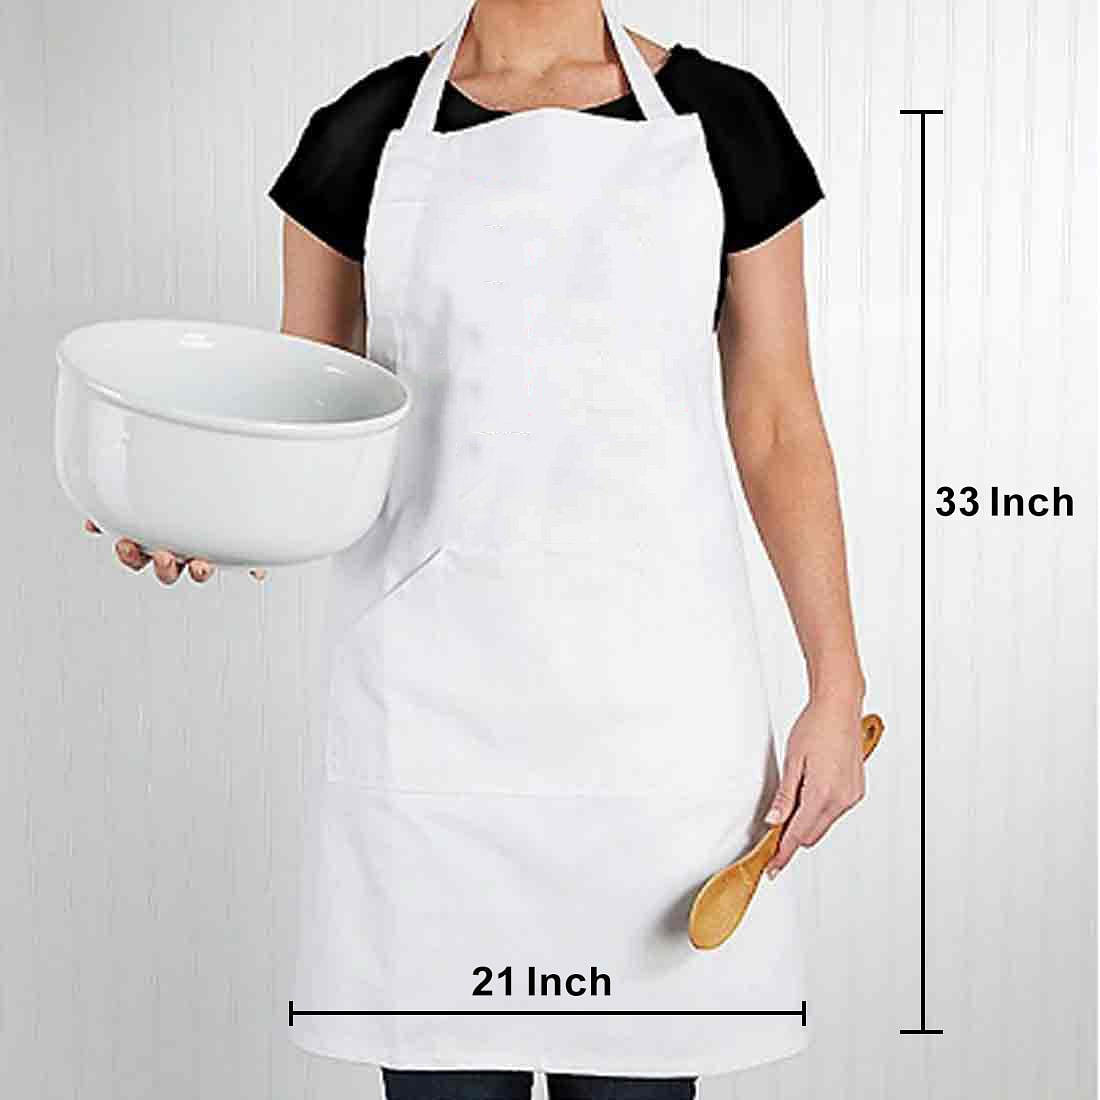 Personalized Bib Aprons for Adults Women - Whip Master Nutcase